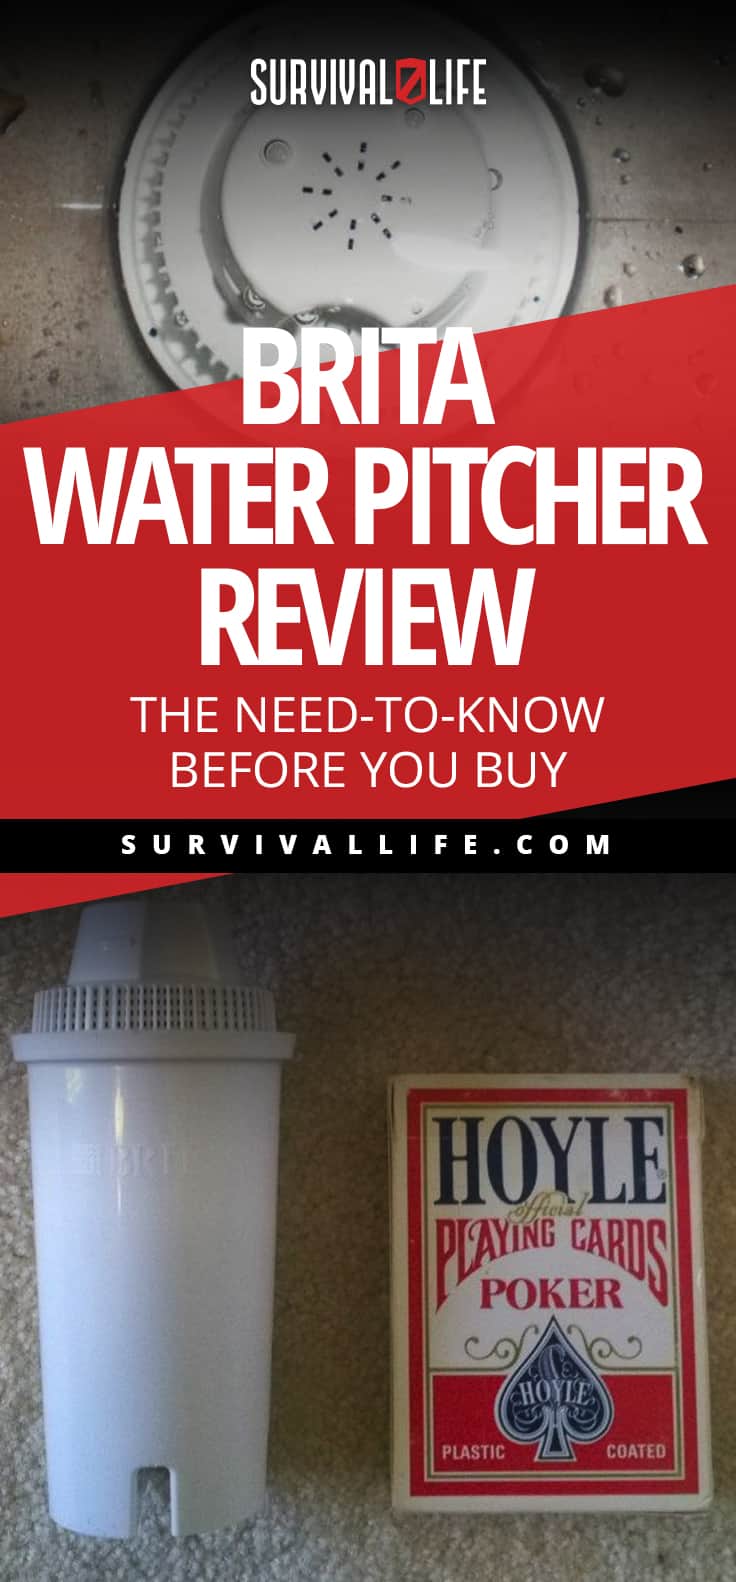 Brita Water Pitcher Review | The Need-to-Know Before You Buy